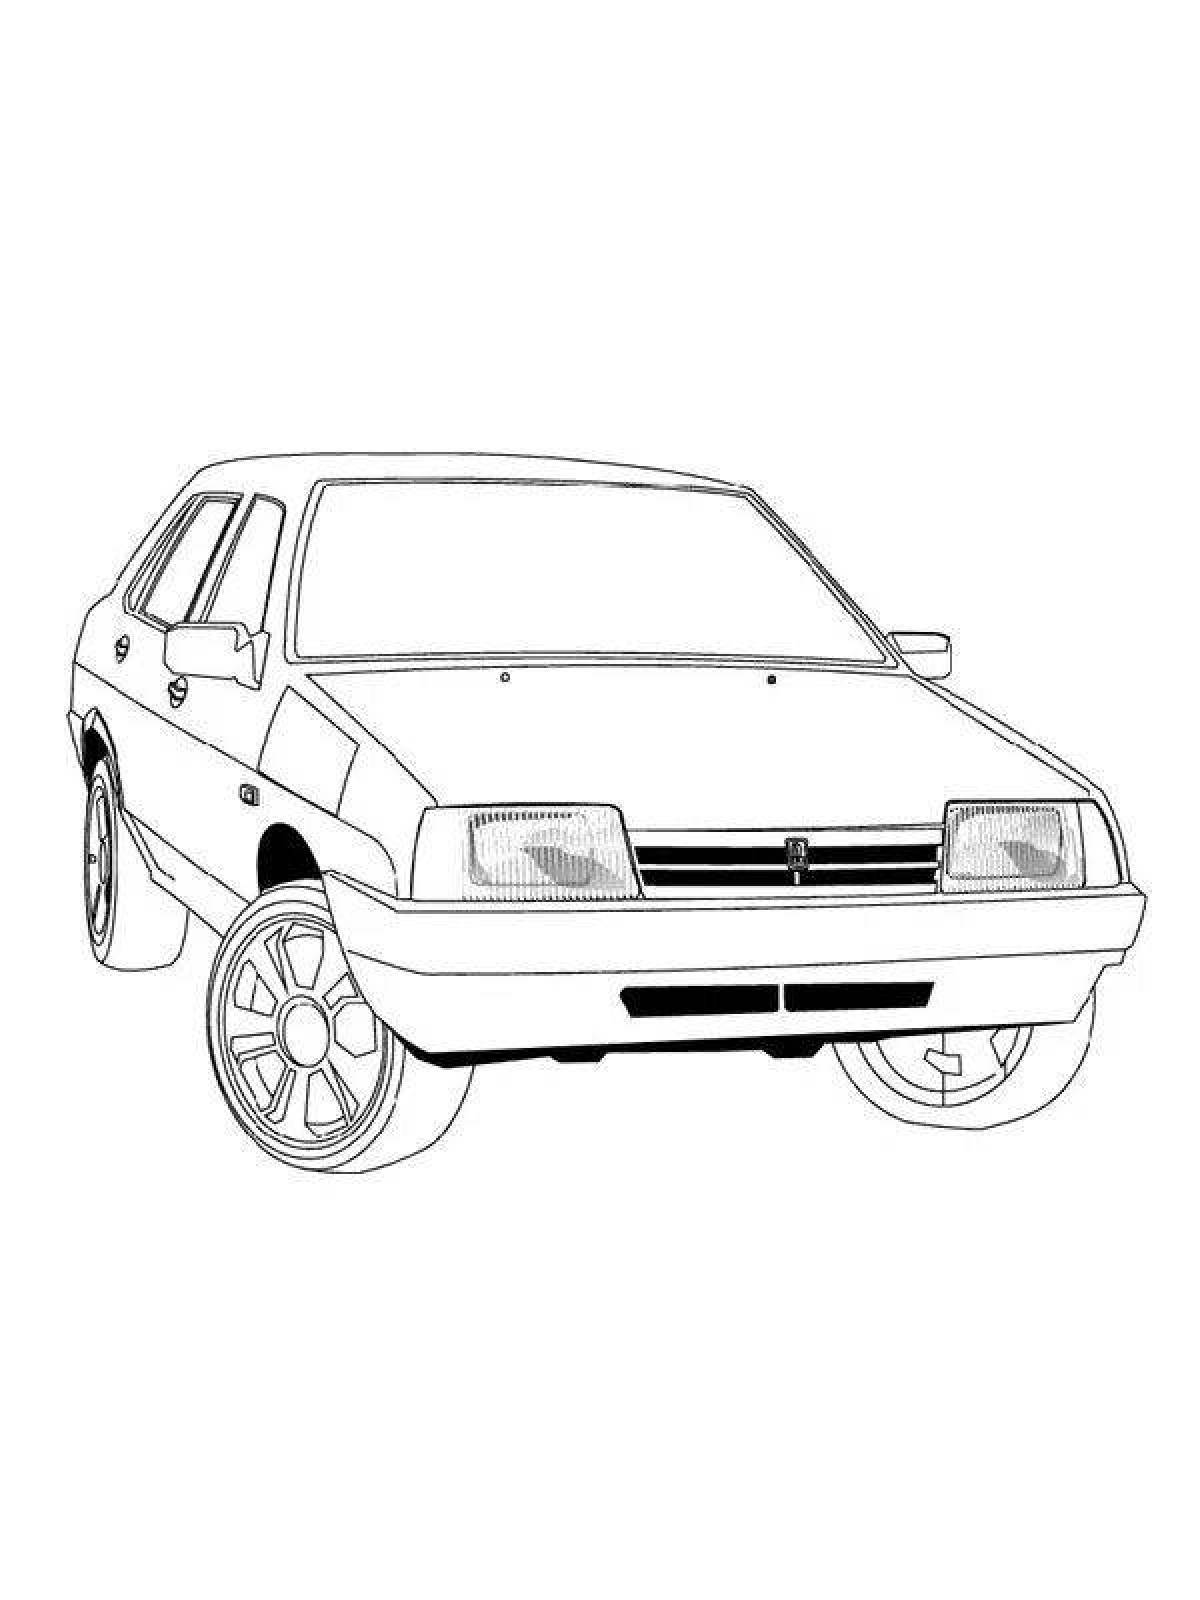 Impressive Russian cars coloring page